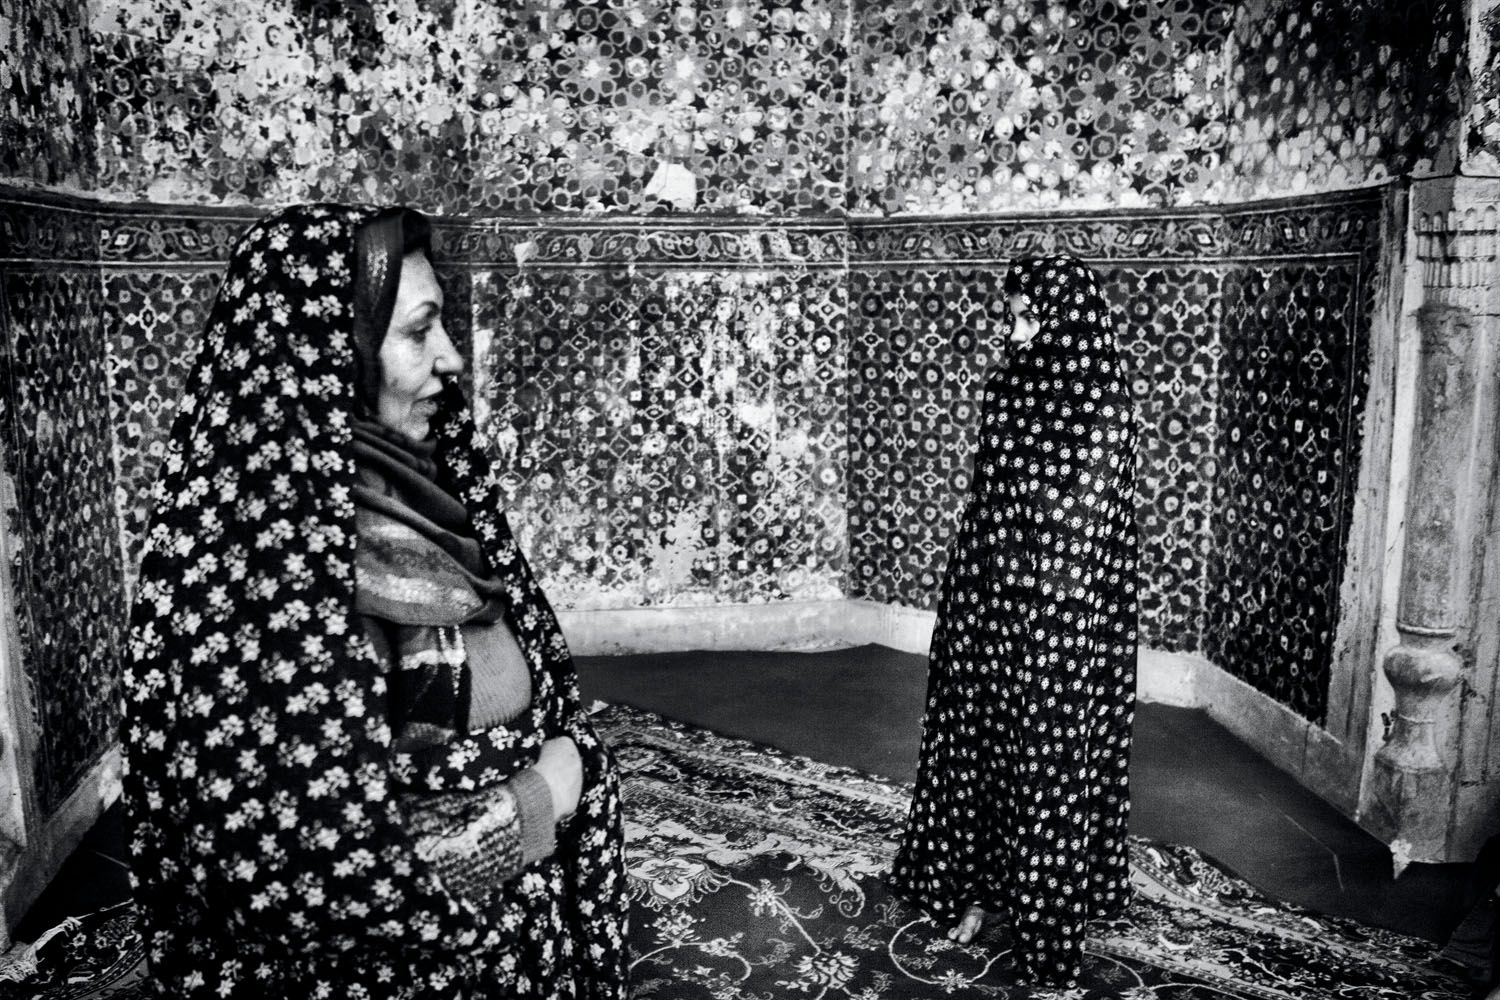 An afghan woman (left) and her daughter, refugees in Iran, visit a Sufi saint on a trip to their homeland. Image by Monika Bulaj. Afghanistan, 2010.